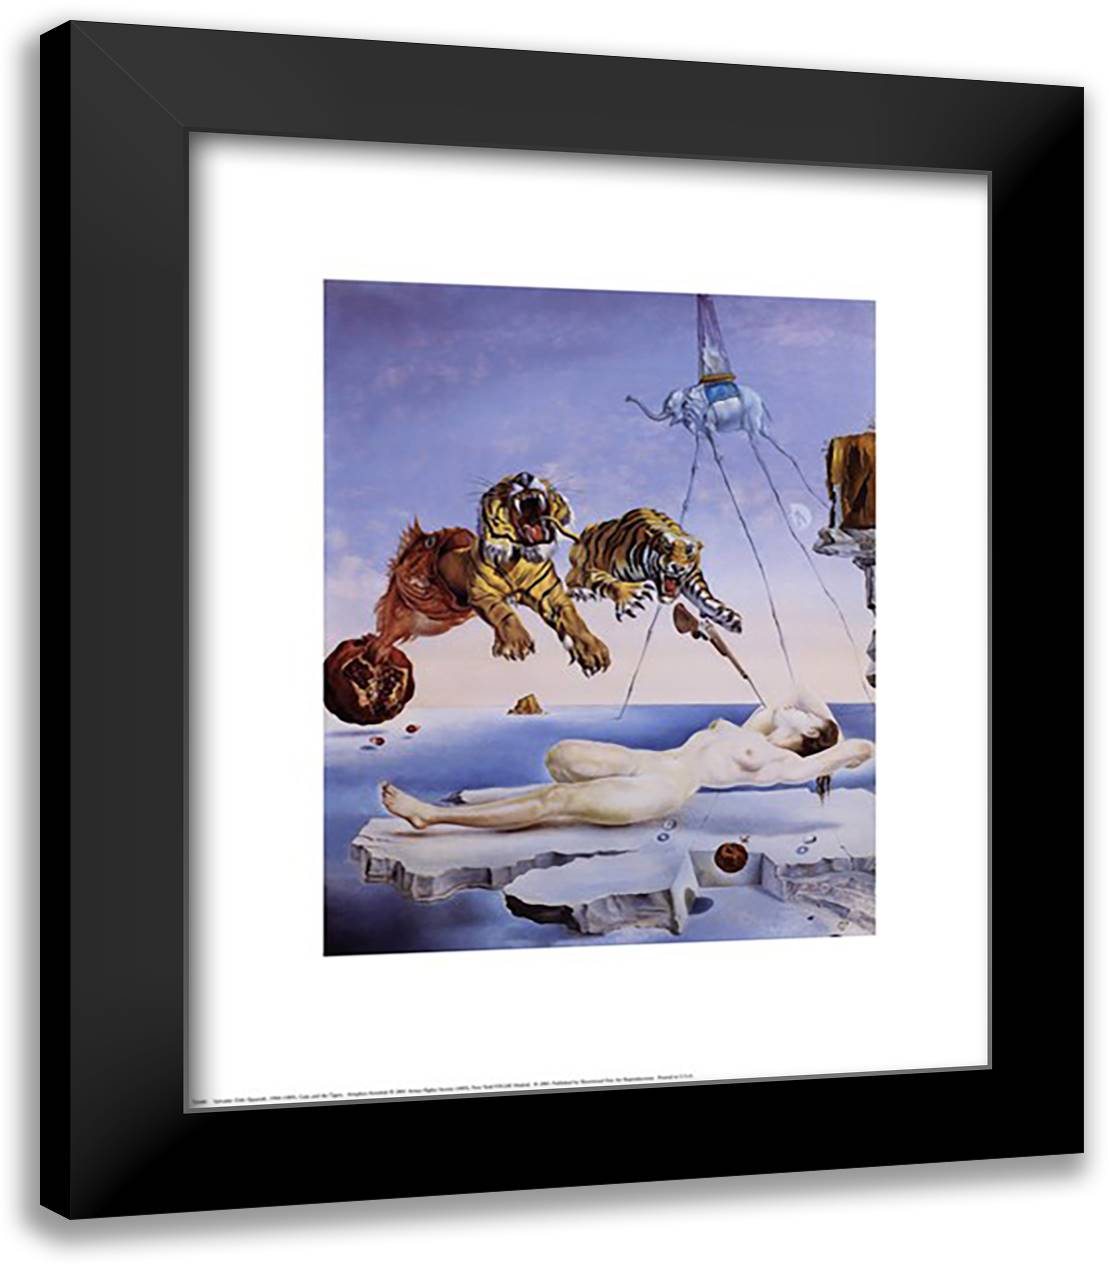 Dream Caused by the Flight of a Bee Around a Pomegranate, A Second Before Awakening, c.1944 20x24 Black Modern Wood Framed Art Print Poster by Dali, Salvador